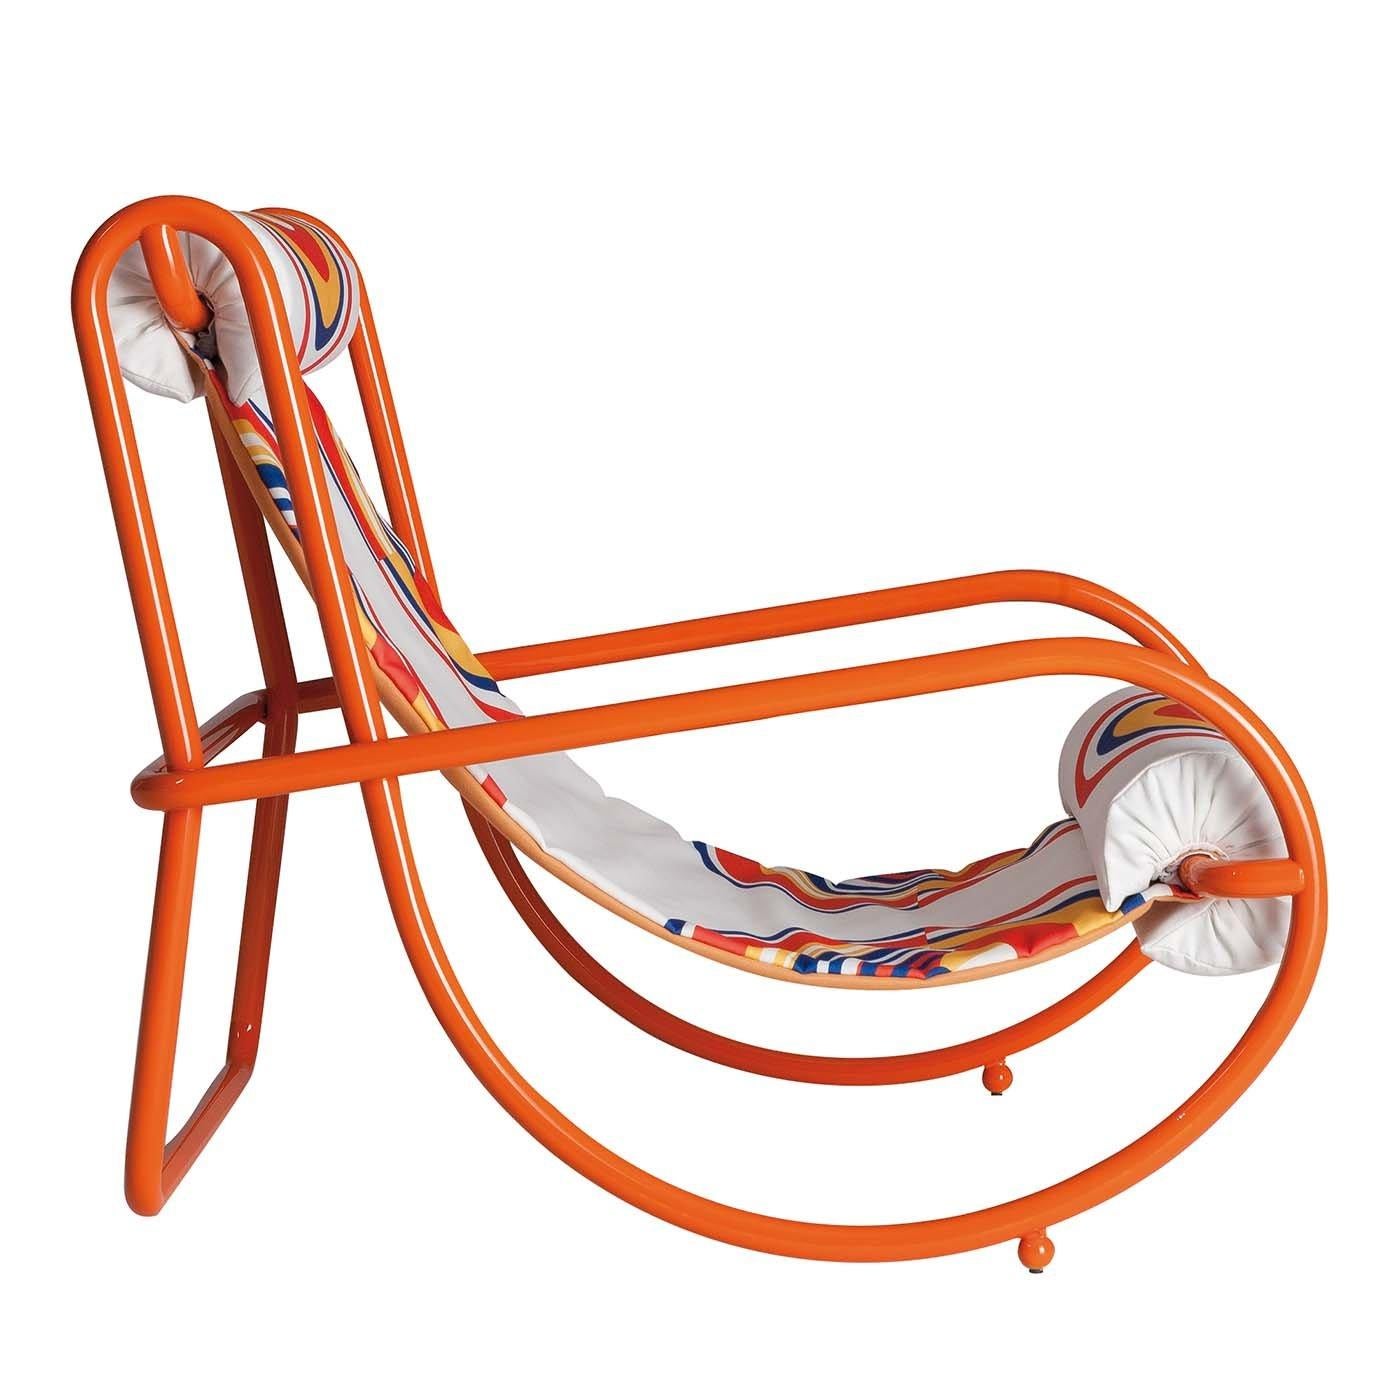 The perfect piece to add color and personality to a patio, garden or pool area, this chair of the Locus Solus collection merges functional design with a unique aesthetic. Originally designed in 1964 by Italian architect Gae Aulenti and re-edited in